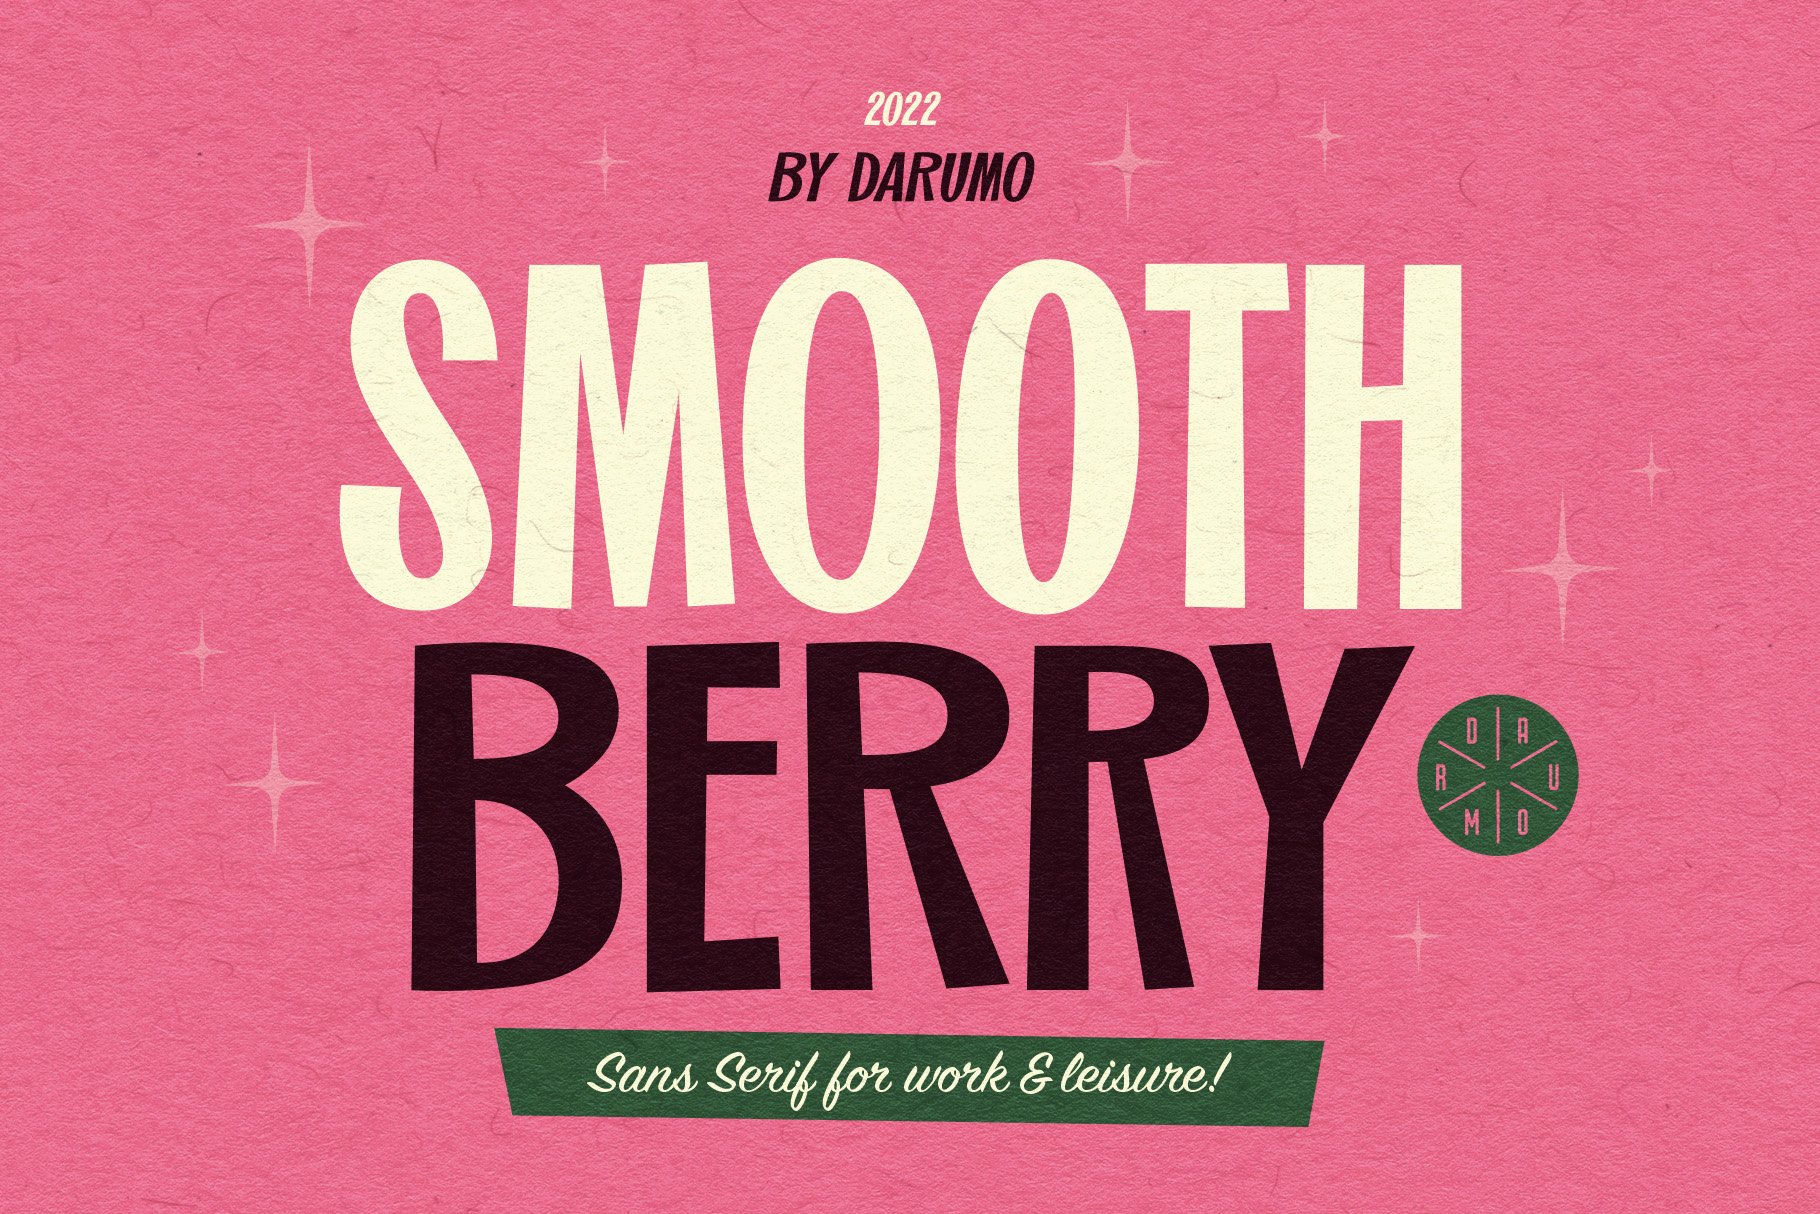 SmoothBerry | Playful Retro Font cover image.